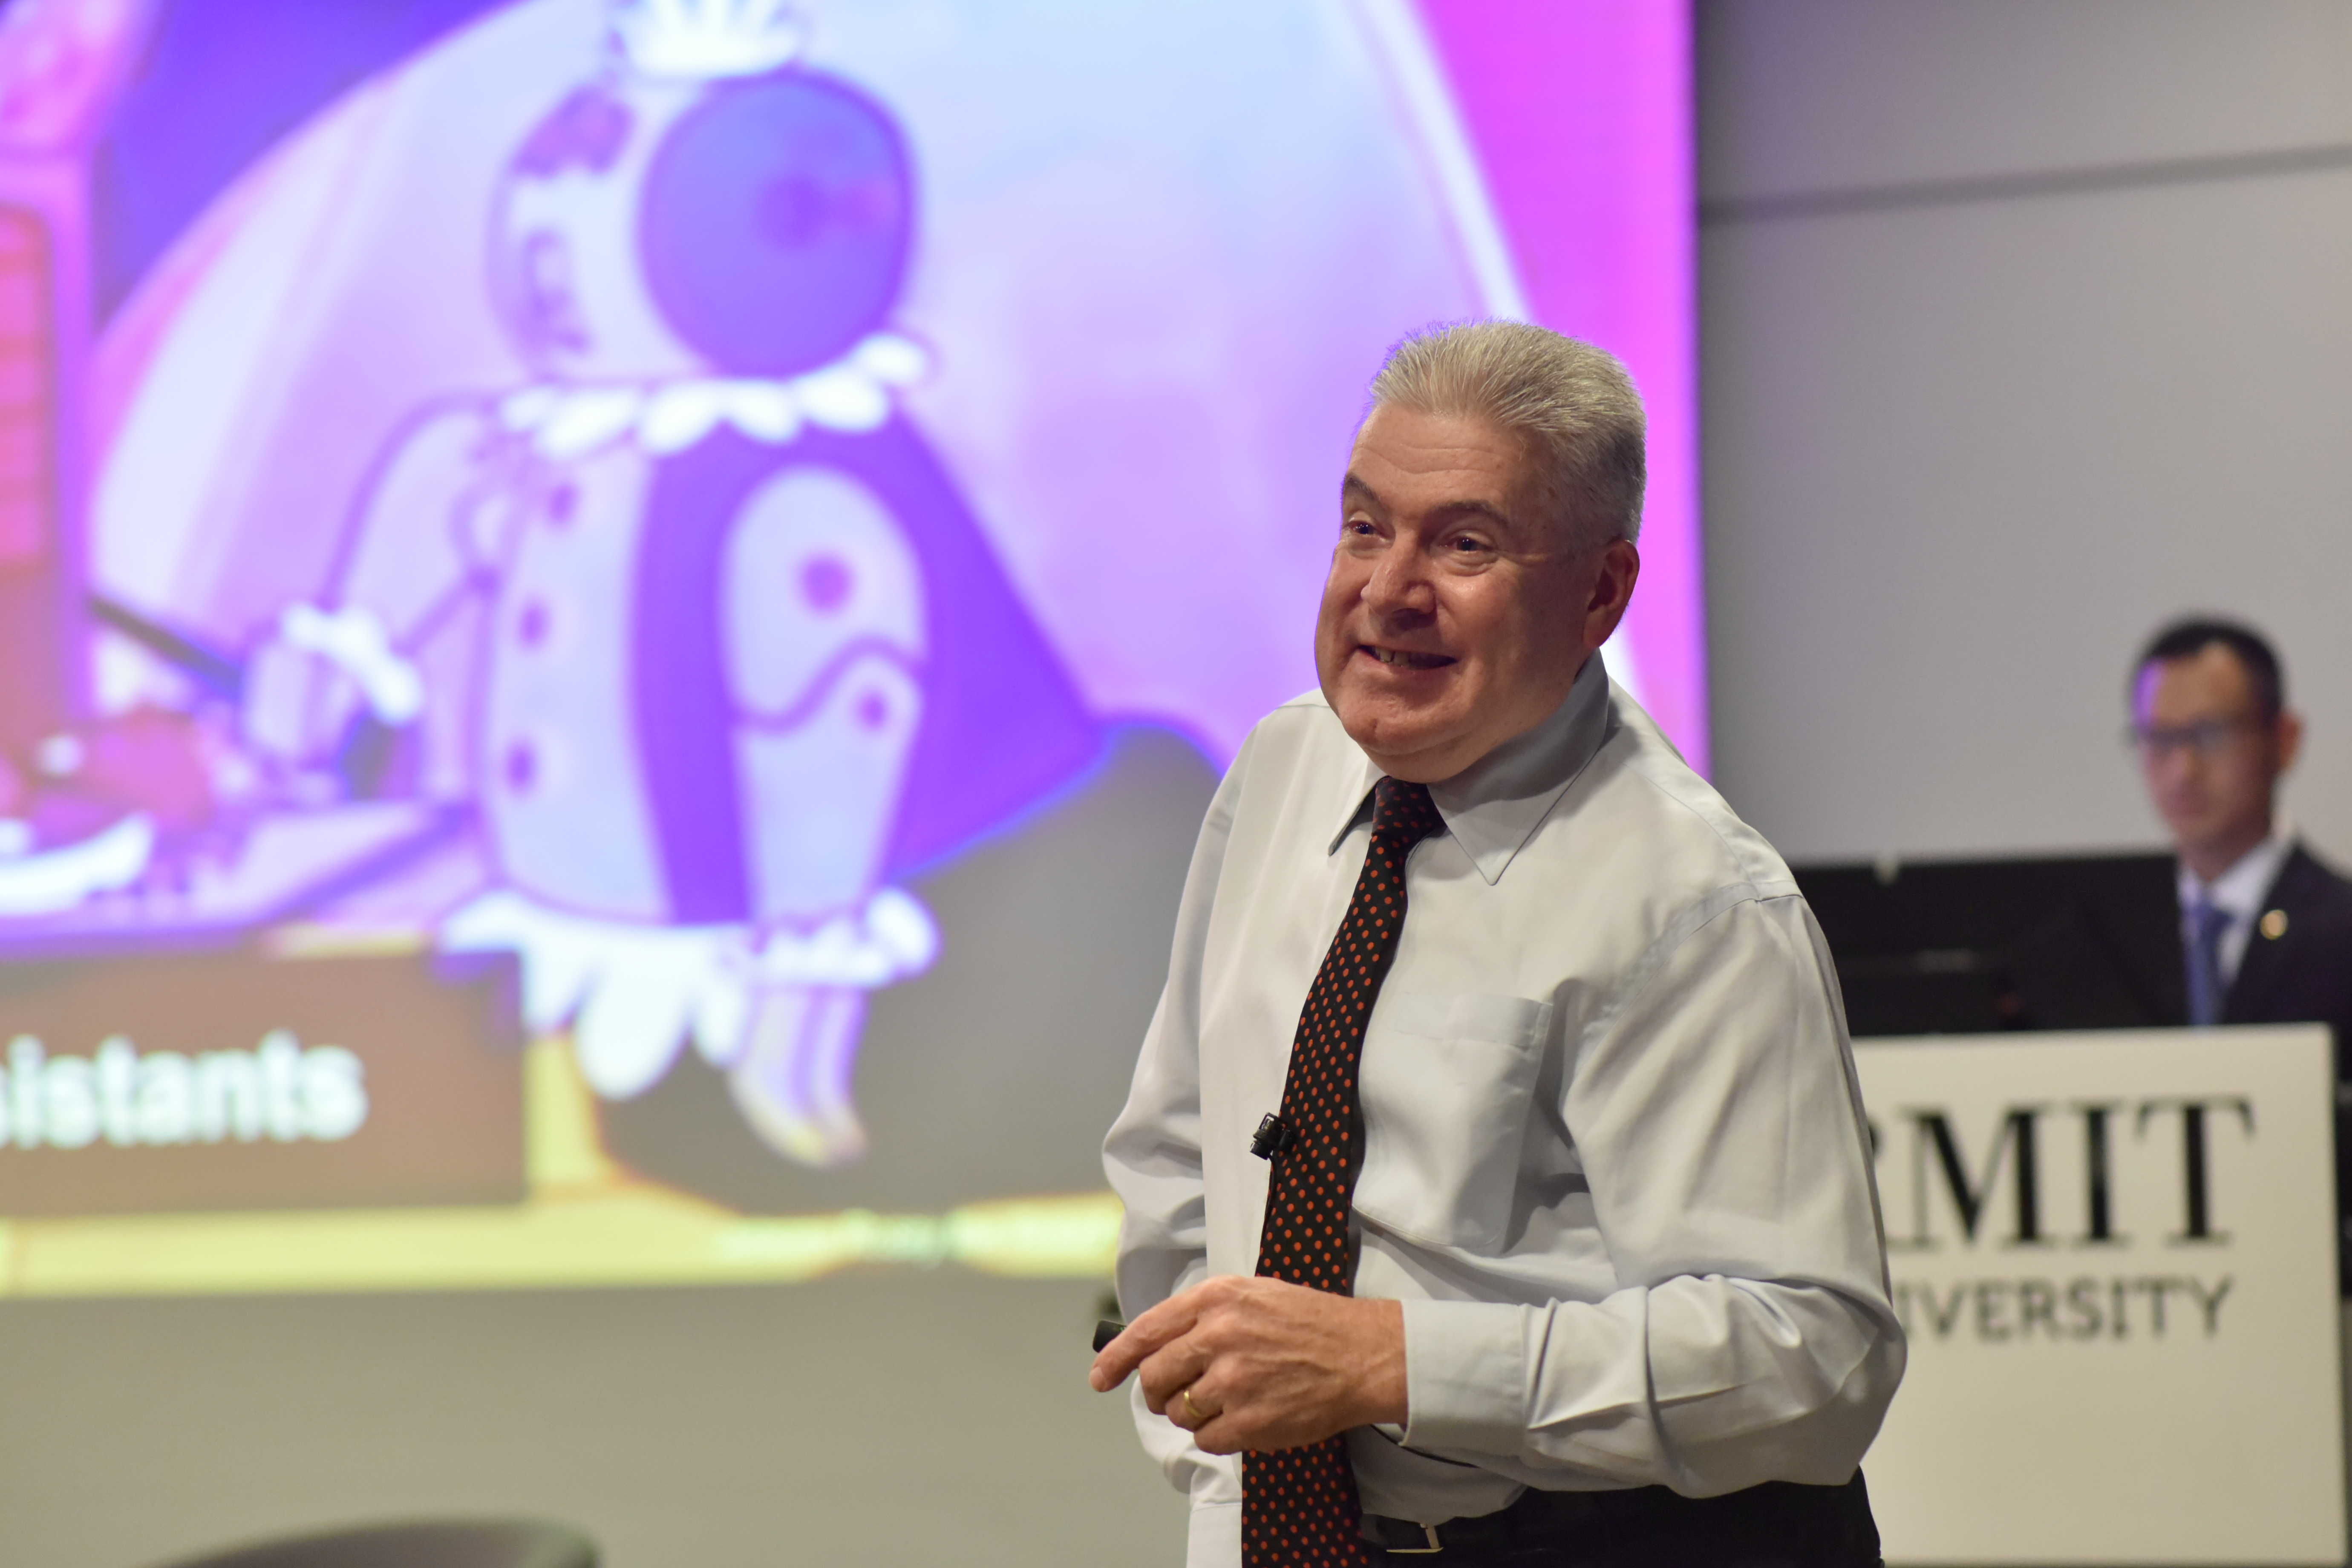 RMIT Vice-Chancellor and President Martin Bean CBE discussed trends and disruptions shaping the future world of work